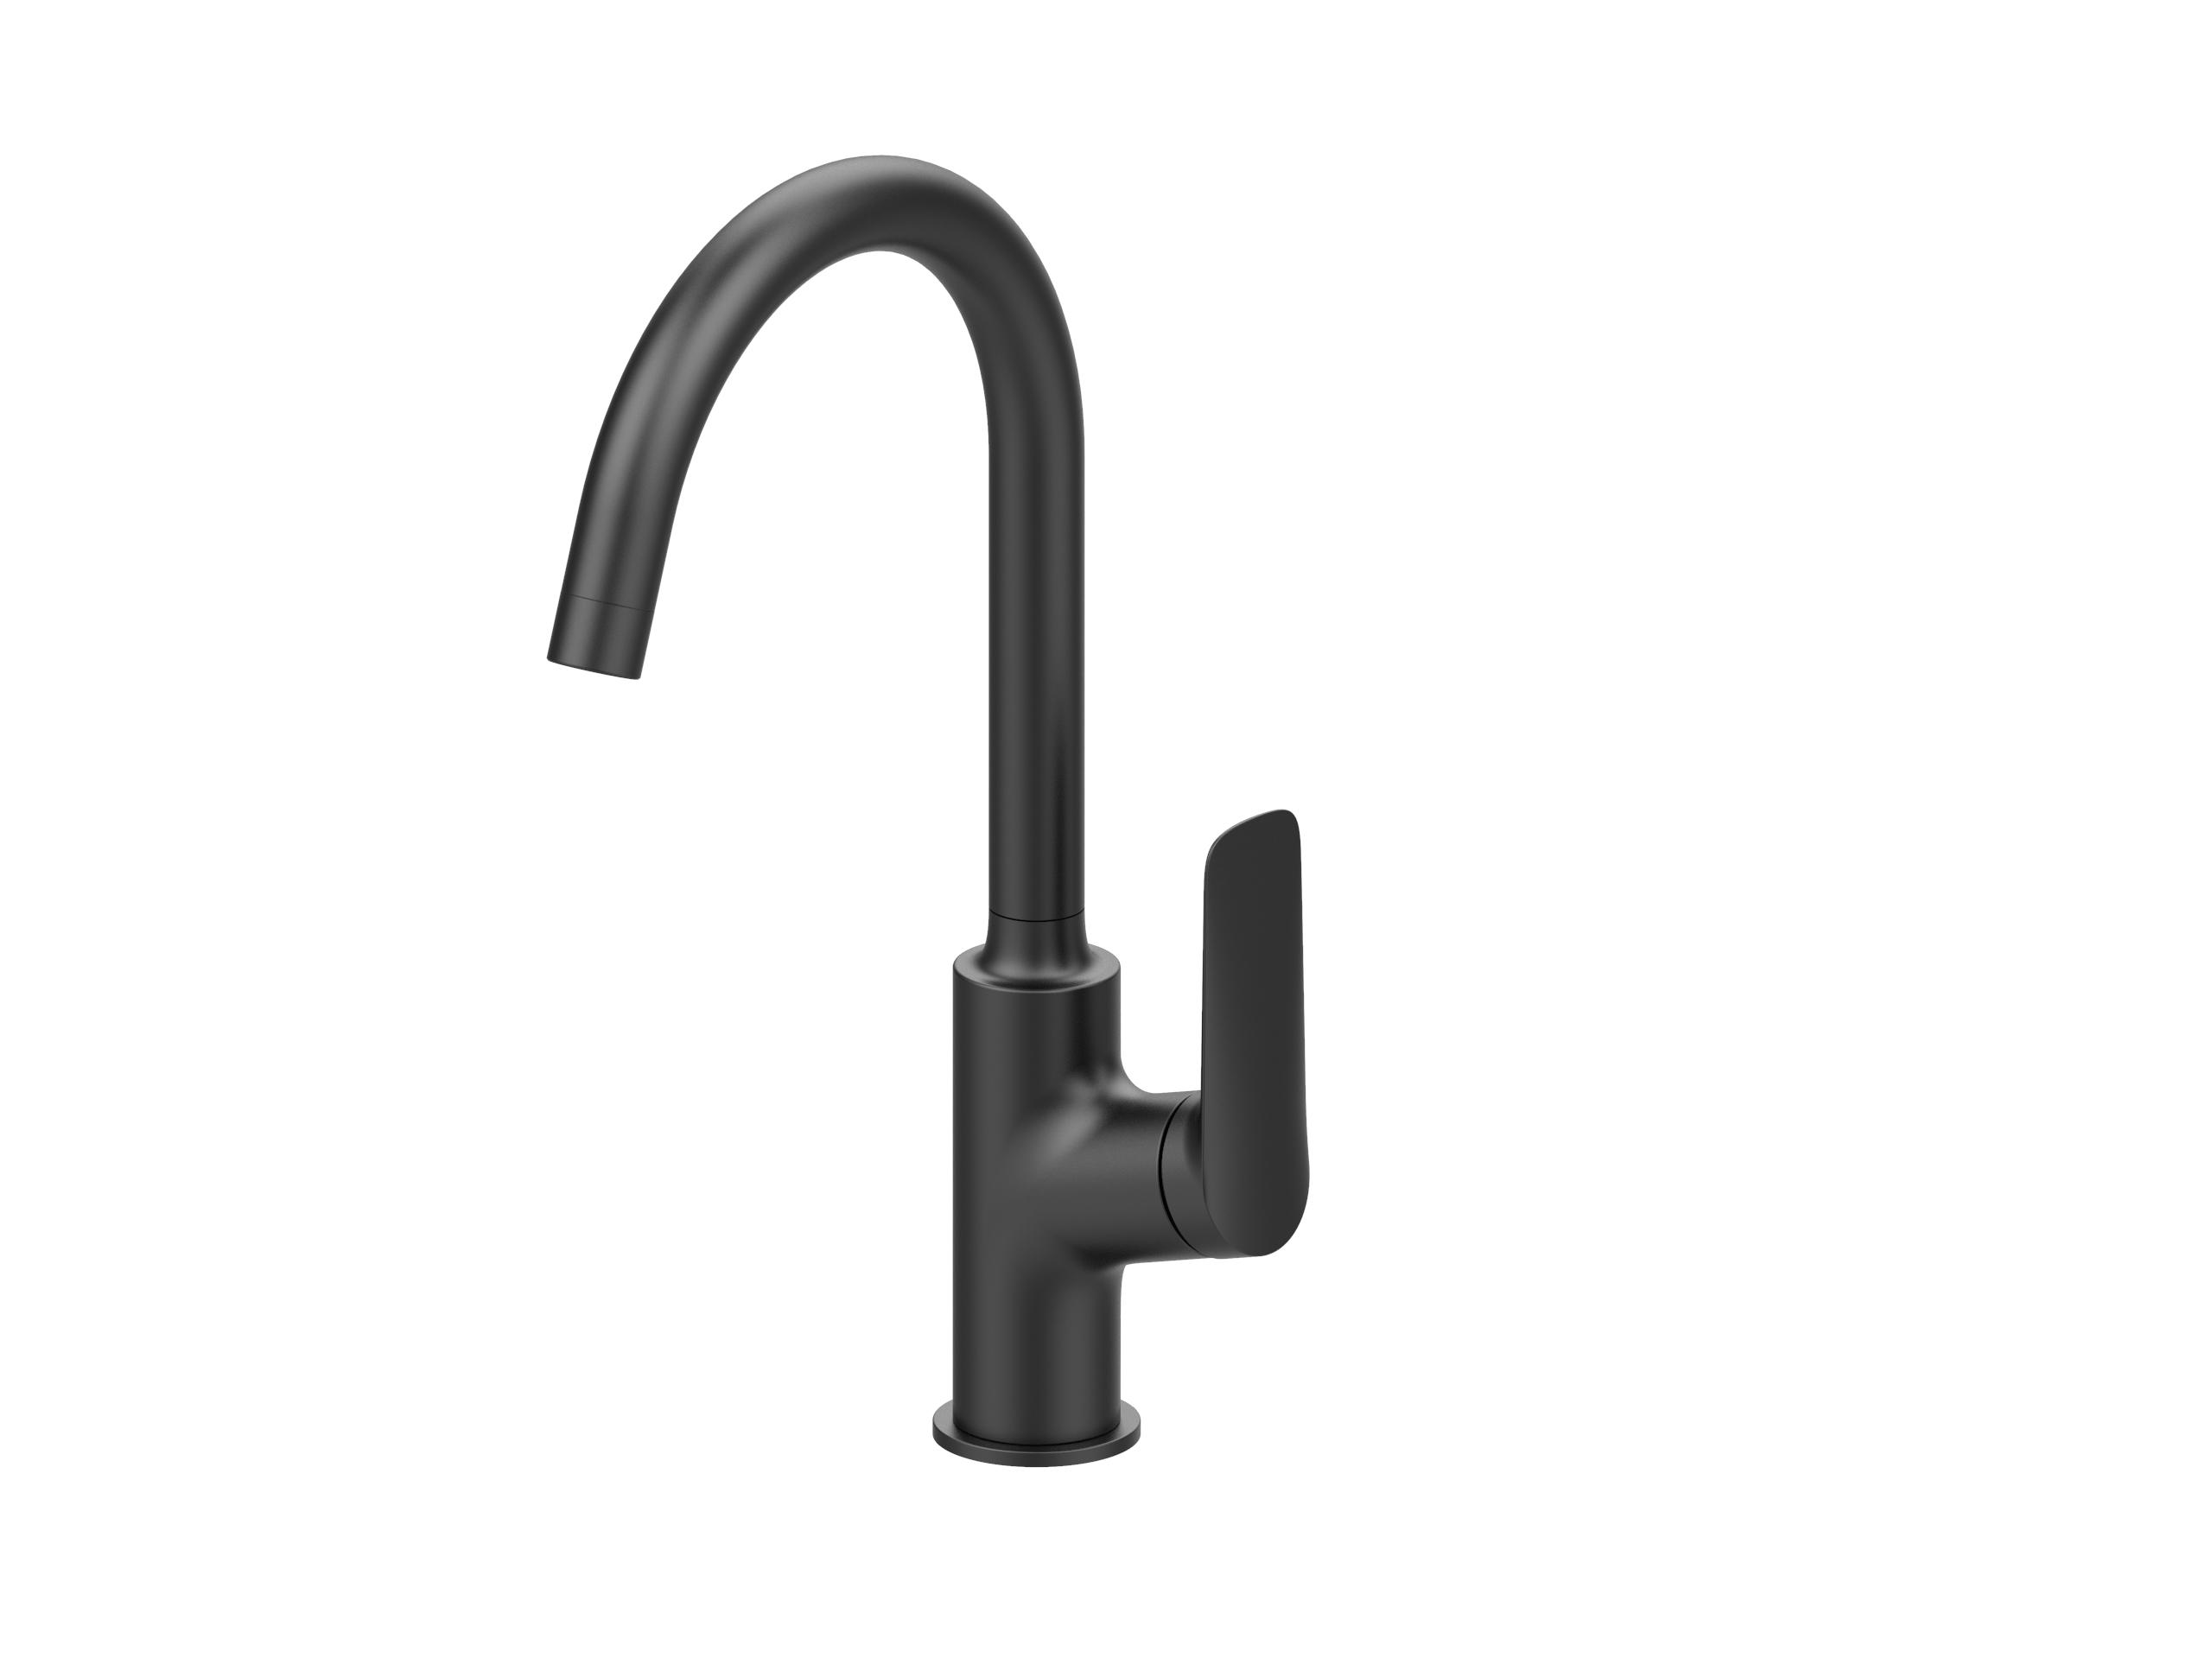 How do brass basin faucets contribute to water efficiency in the bathroom?